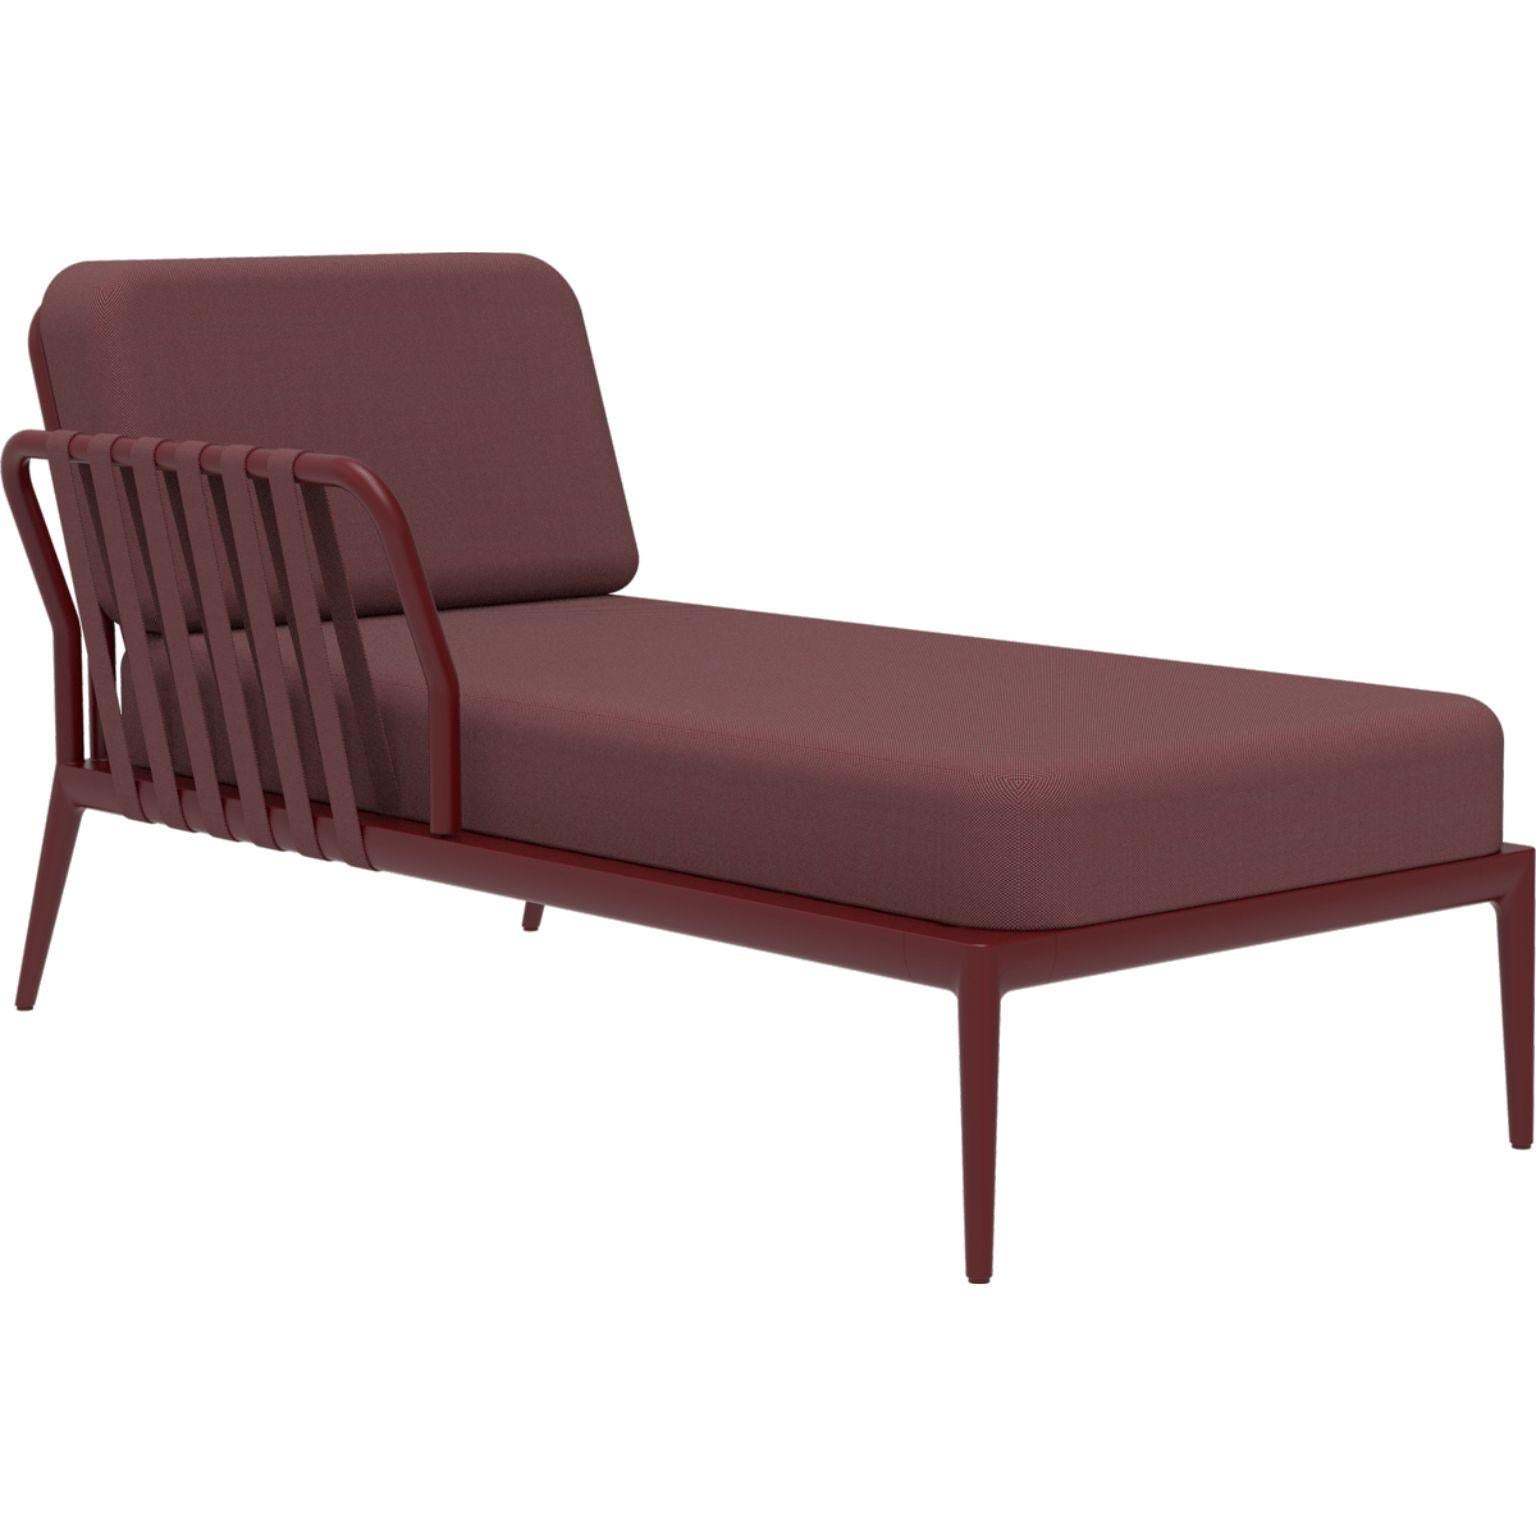 Ribbons burgundy right chaise longue by MOWEE
Dimensions: D80 x W155 x H81 cm
Material: aluminum, upholstery
Weight: 28 kg
Also available in different colours and finishes.

An unmistakable collection for its beauty and robustness. A tribute